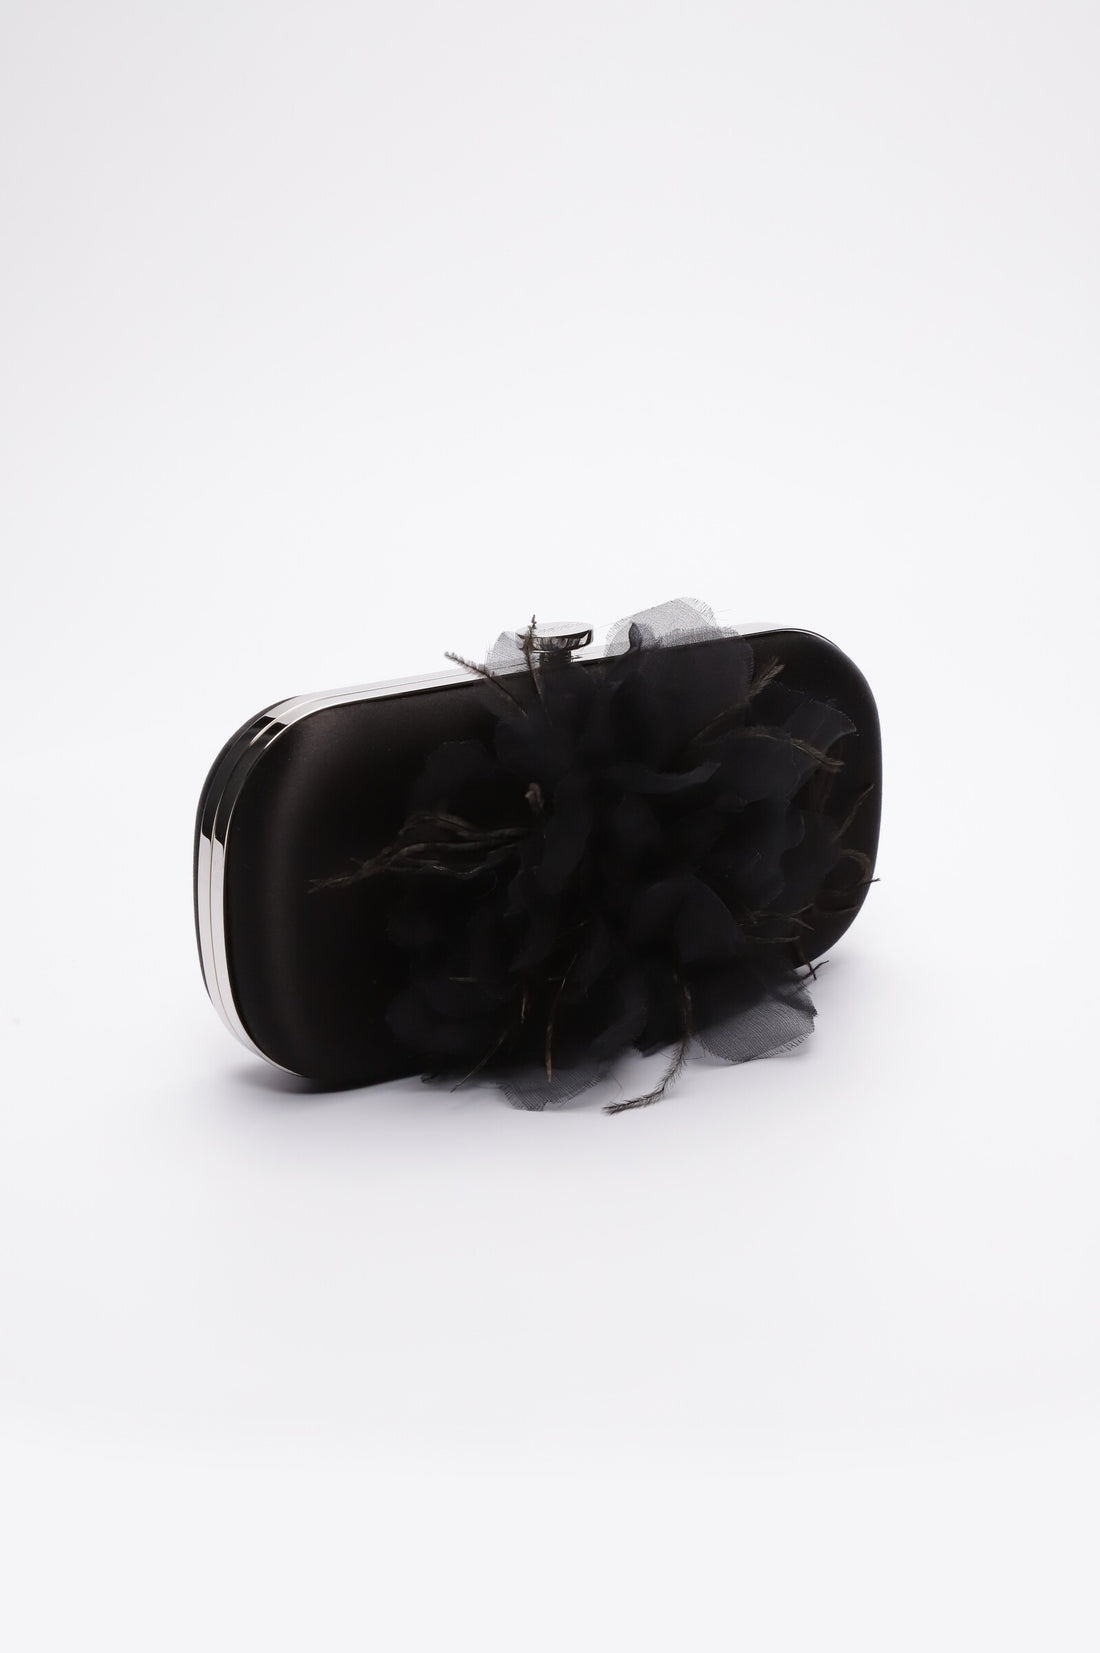 Side view of Bella Fiori Clutch in black satin with black flower adored on front side.